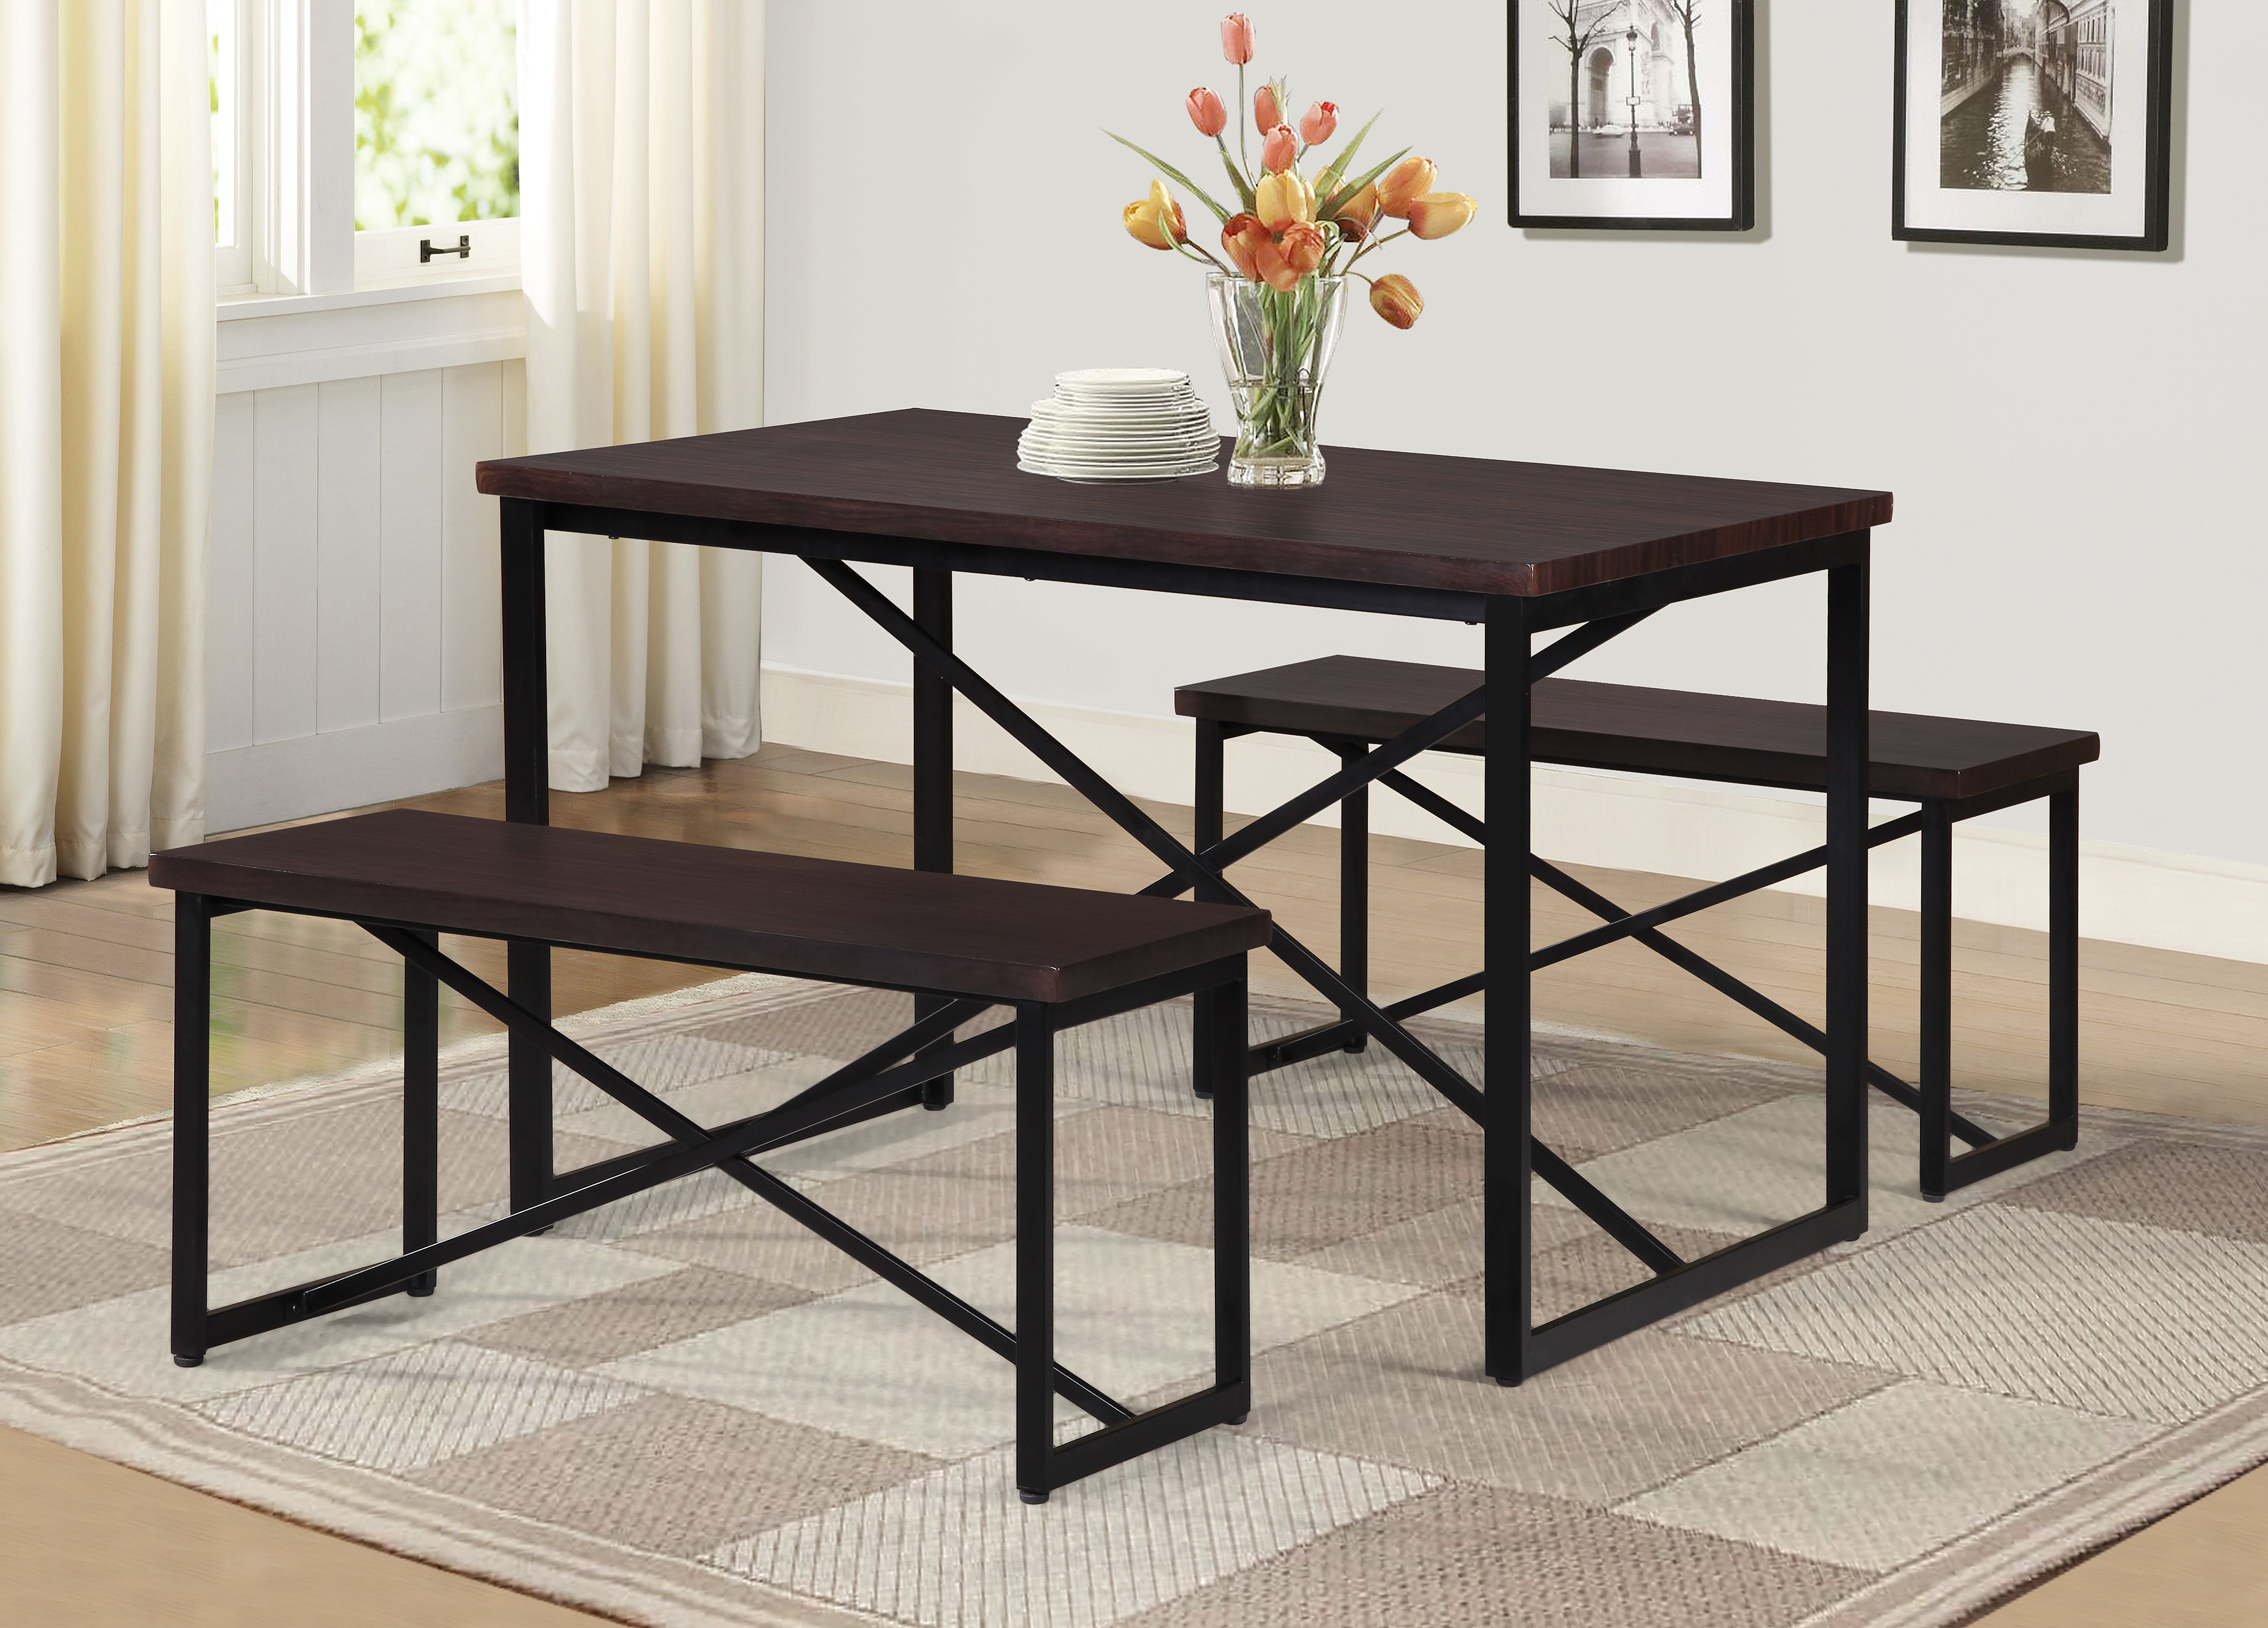 Williston Forge Bearden 3 Piece Dining Set & Reviews (View 16 of 20)